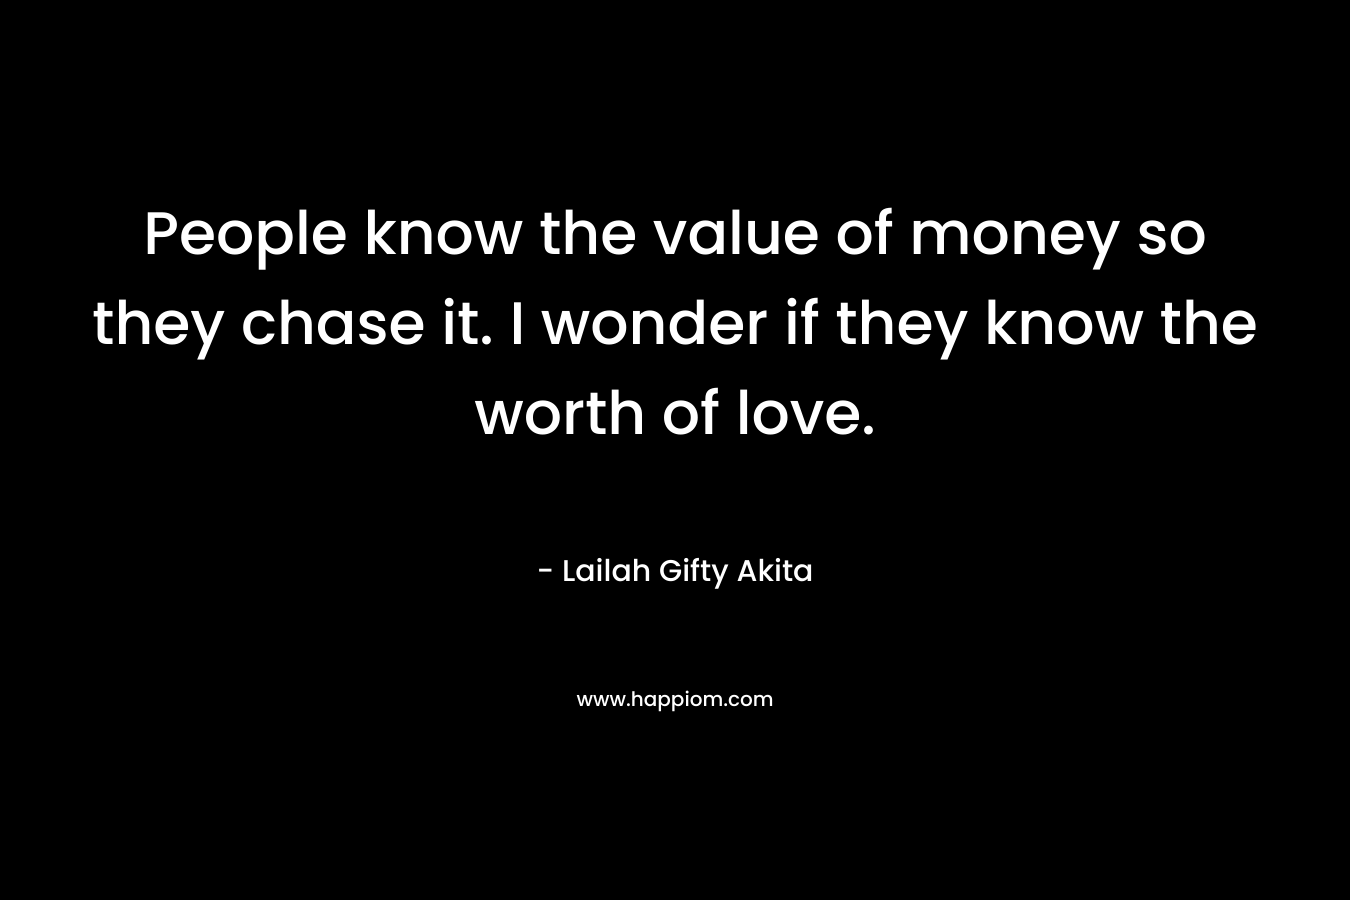 People know the value of money so they chase it. I wonder if they know the worth of love.